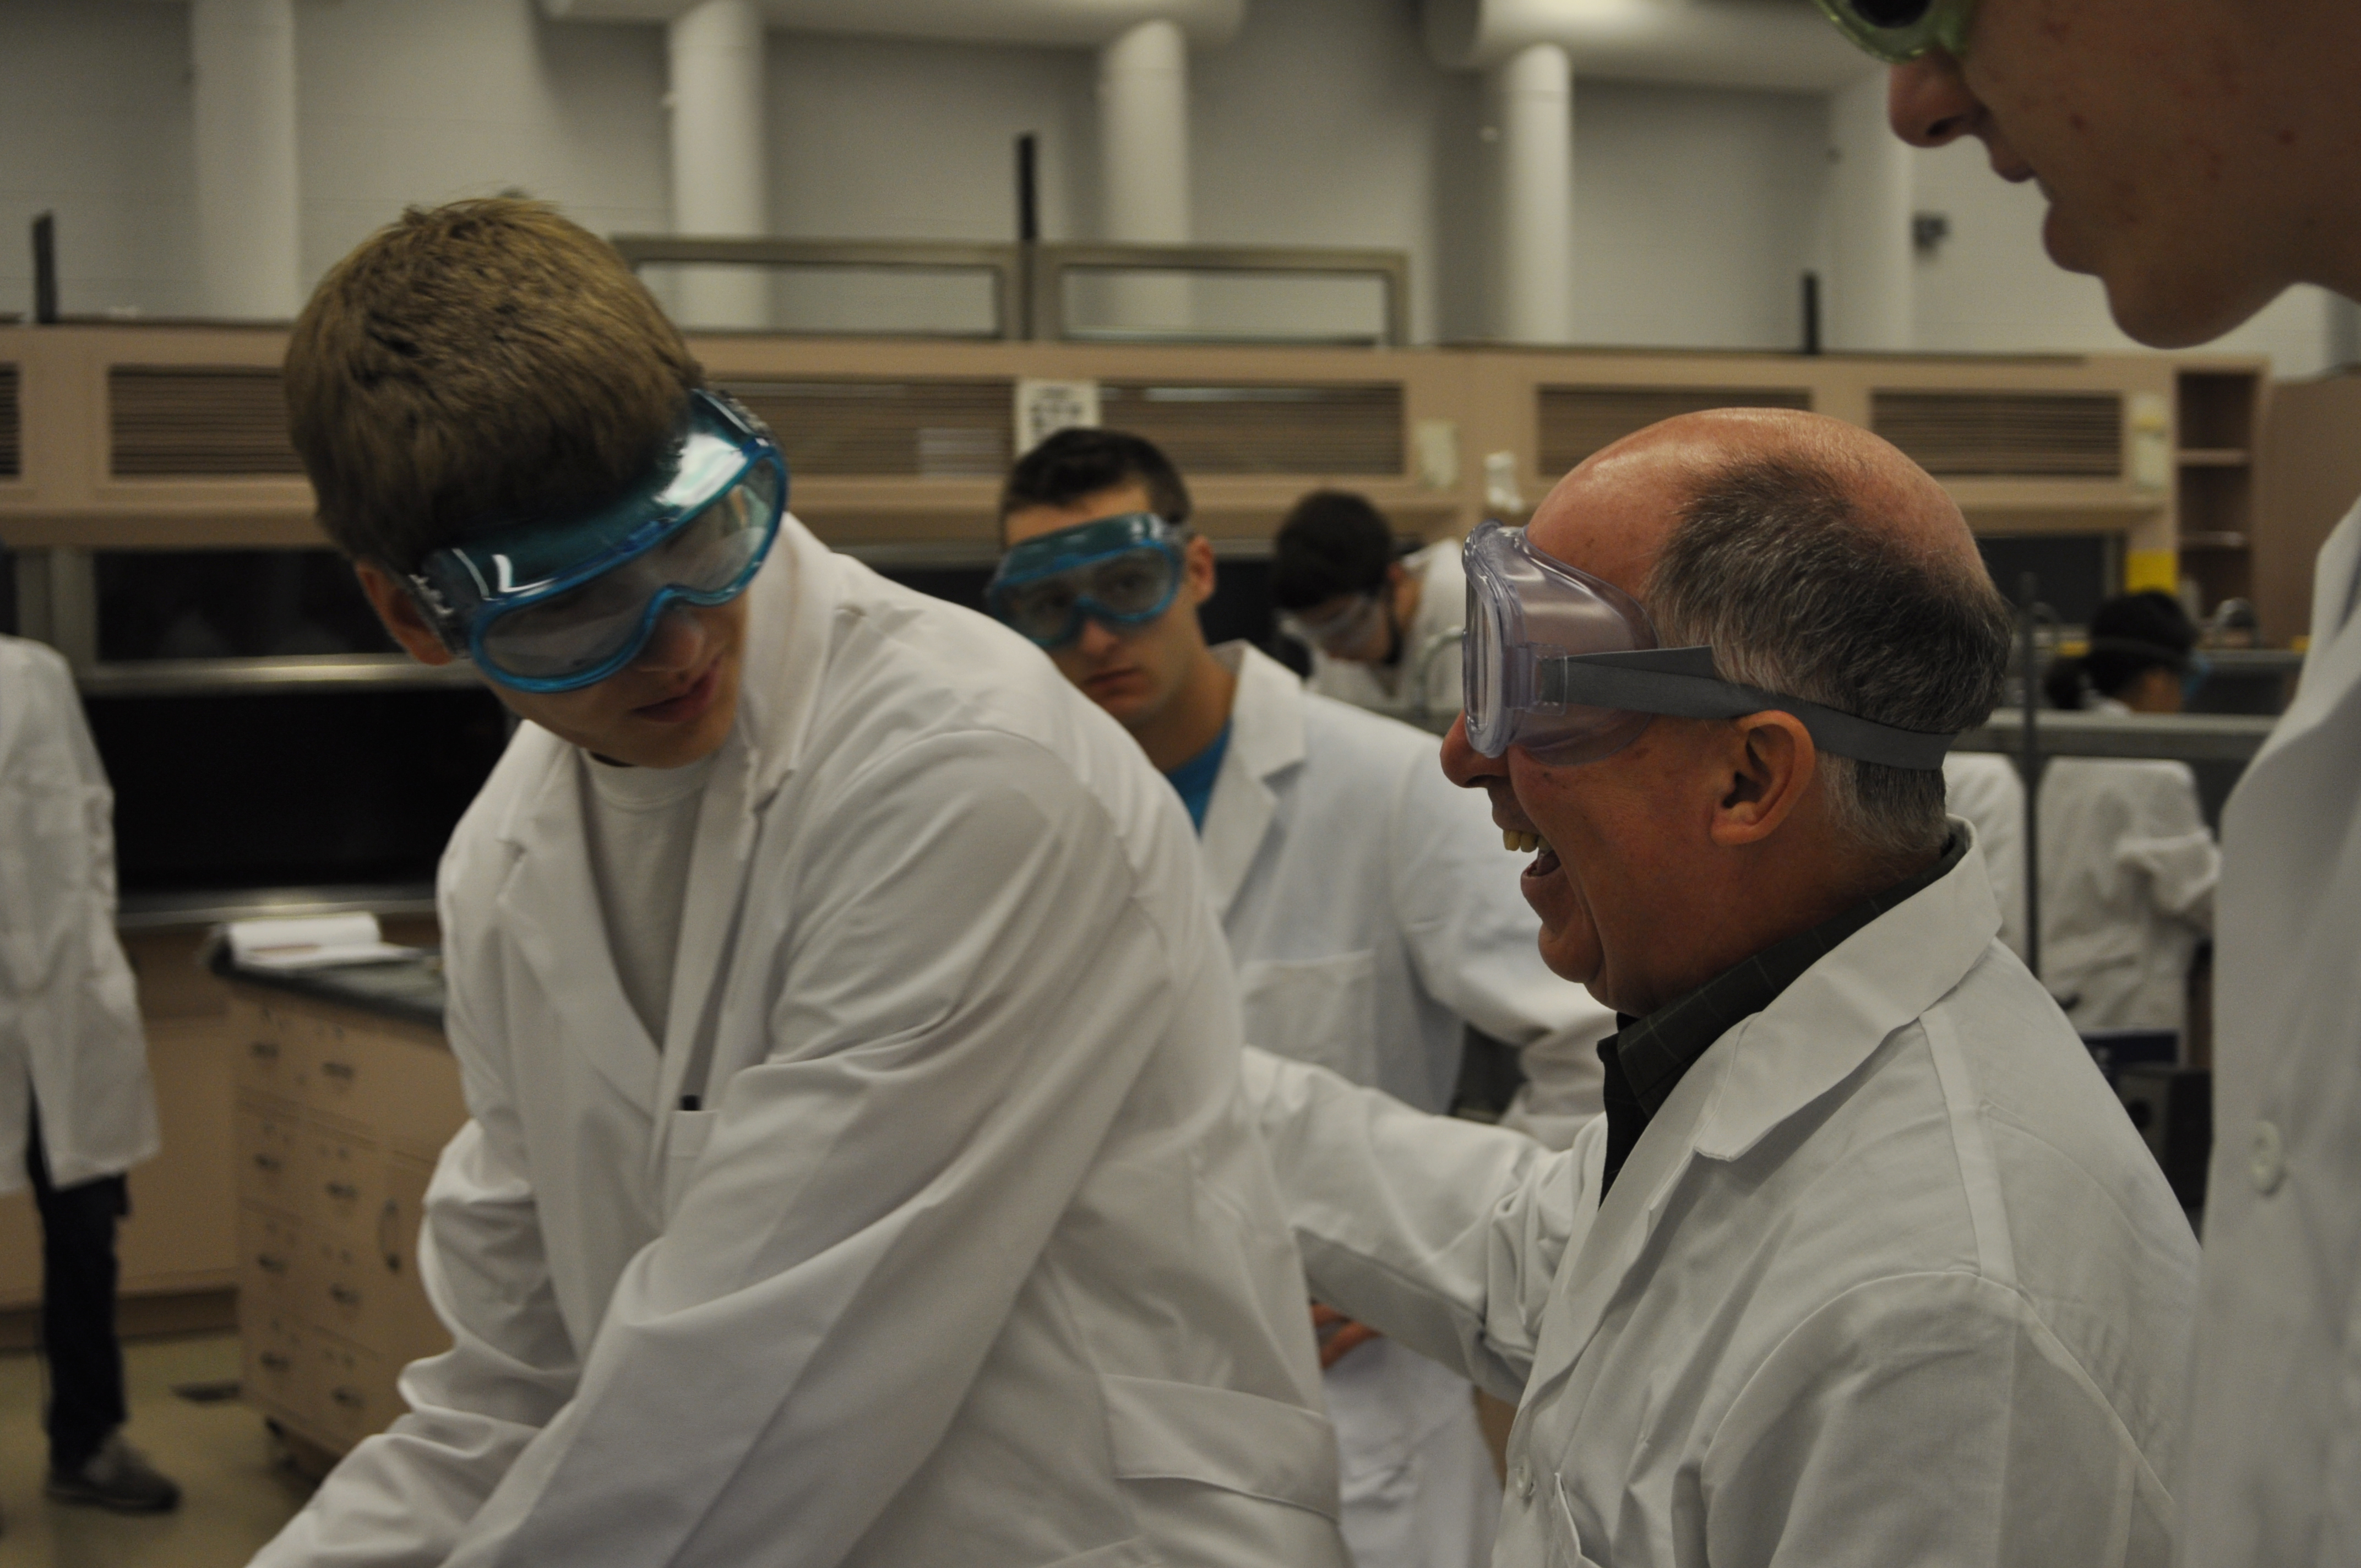 Robert Burnett pats a student on the back during a lab